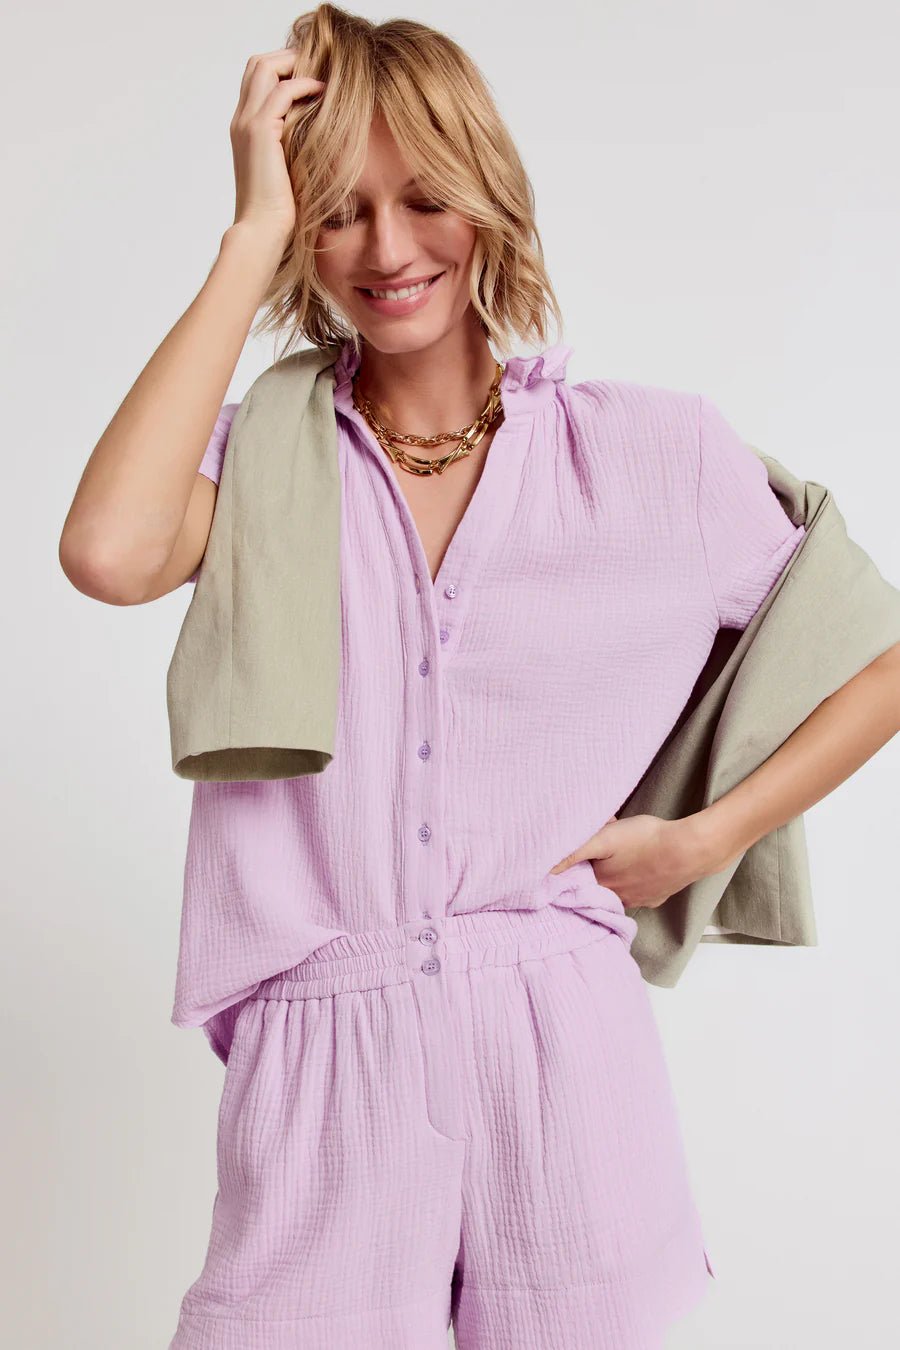 The Short Sleeve Loose Back Shirt Lilac Gauze - The Shirt by Rochelle Behrens - COLOR GAME